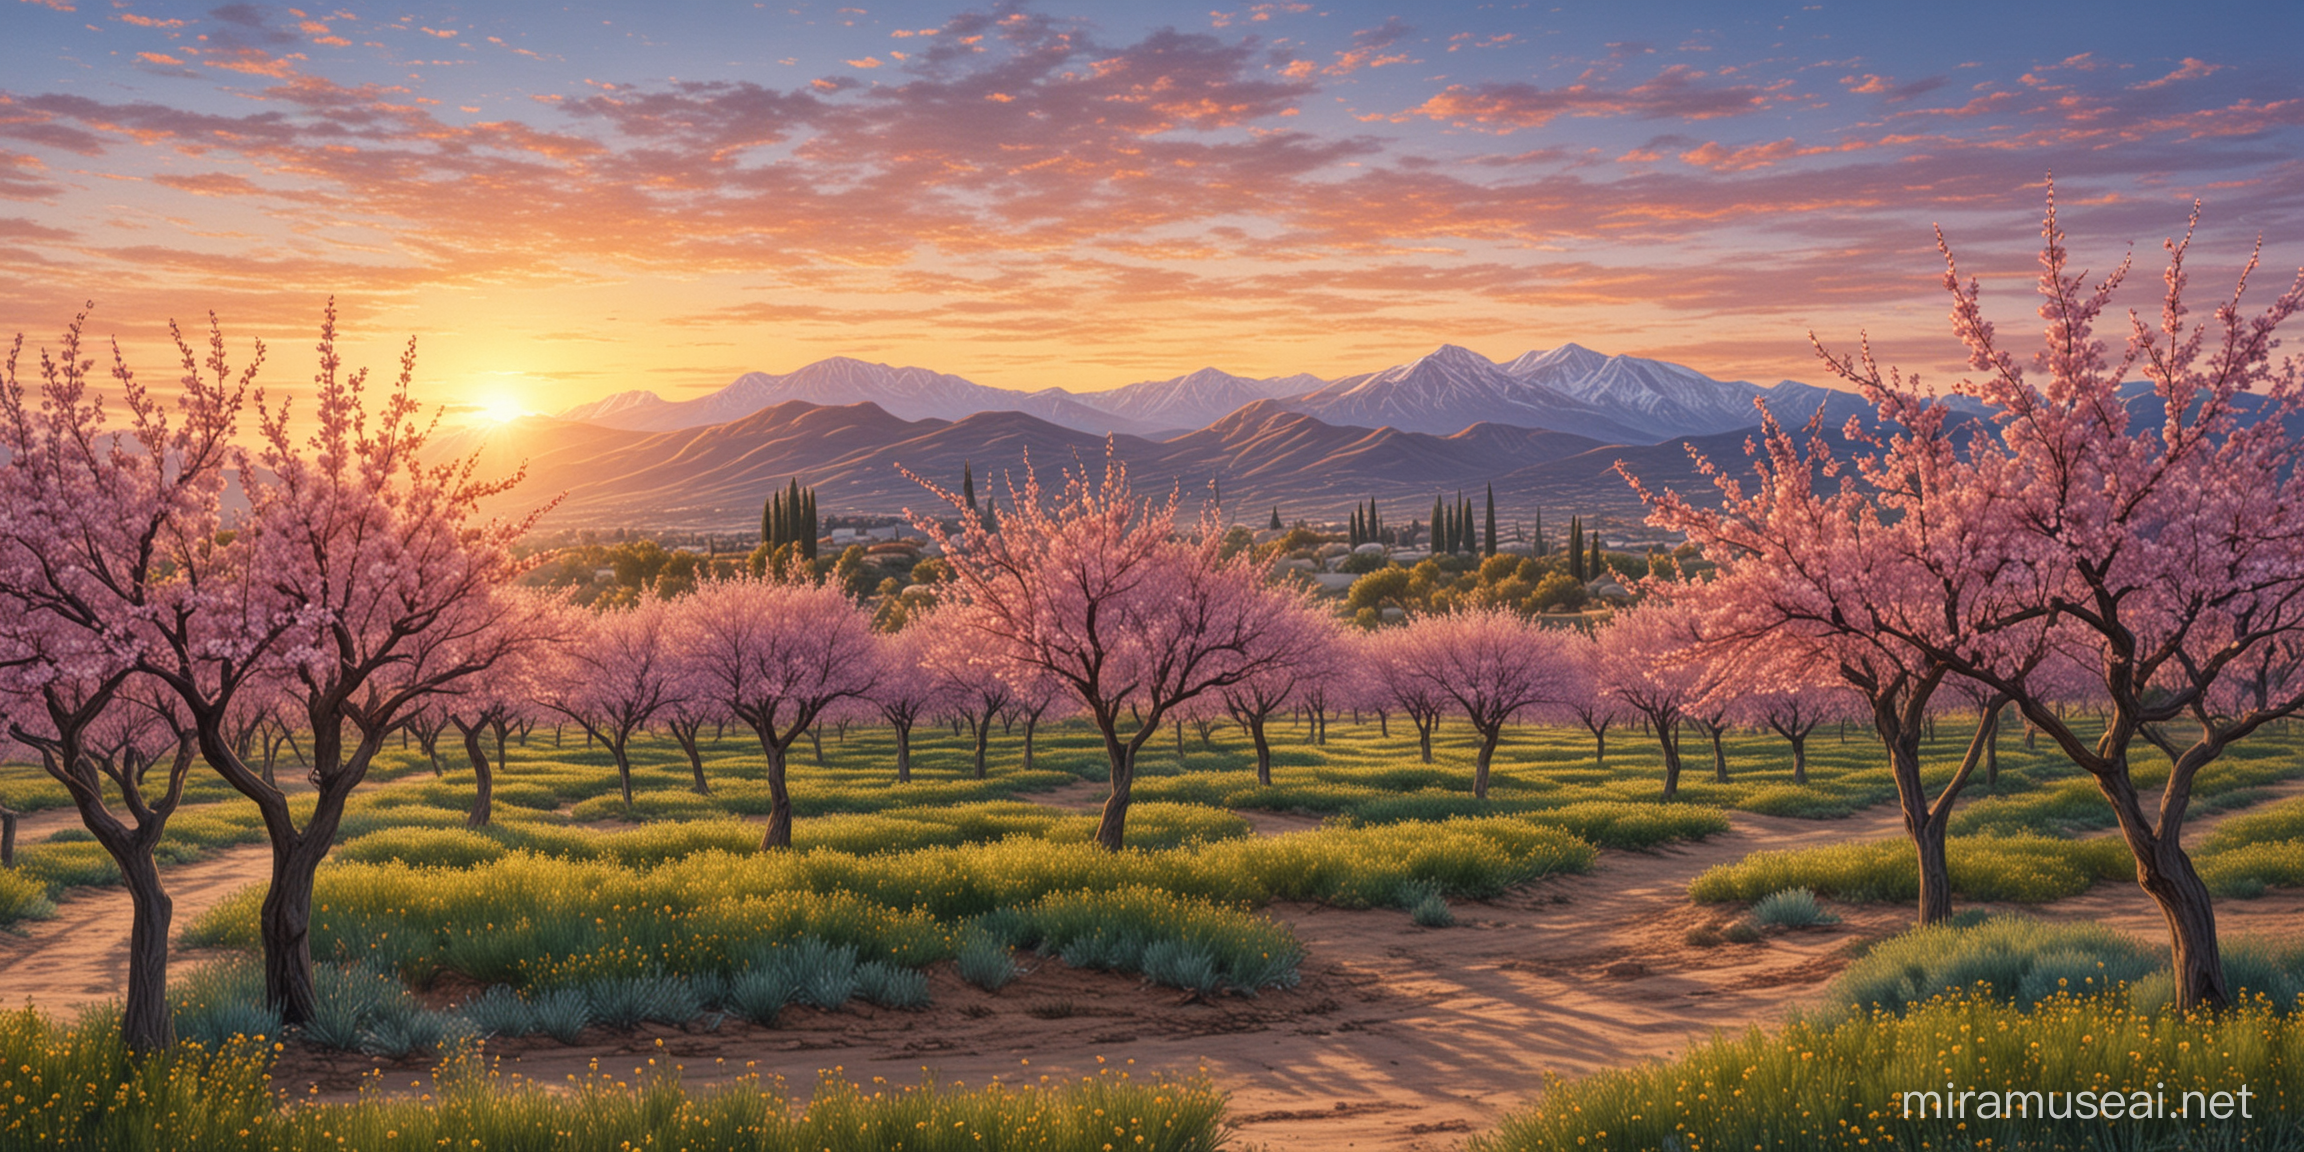 Pencil Drawing of Almond Tree Garden at Sunset with Mountain Silhouette